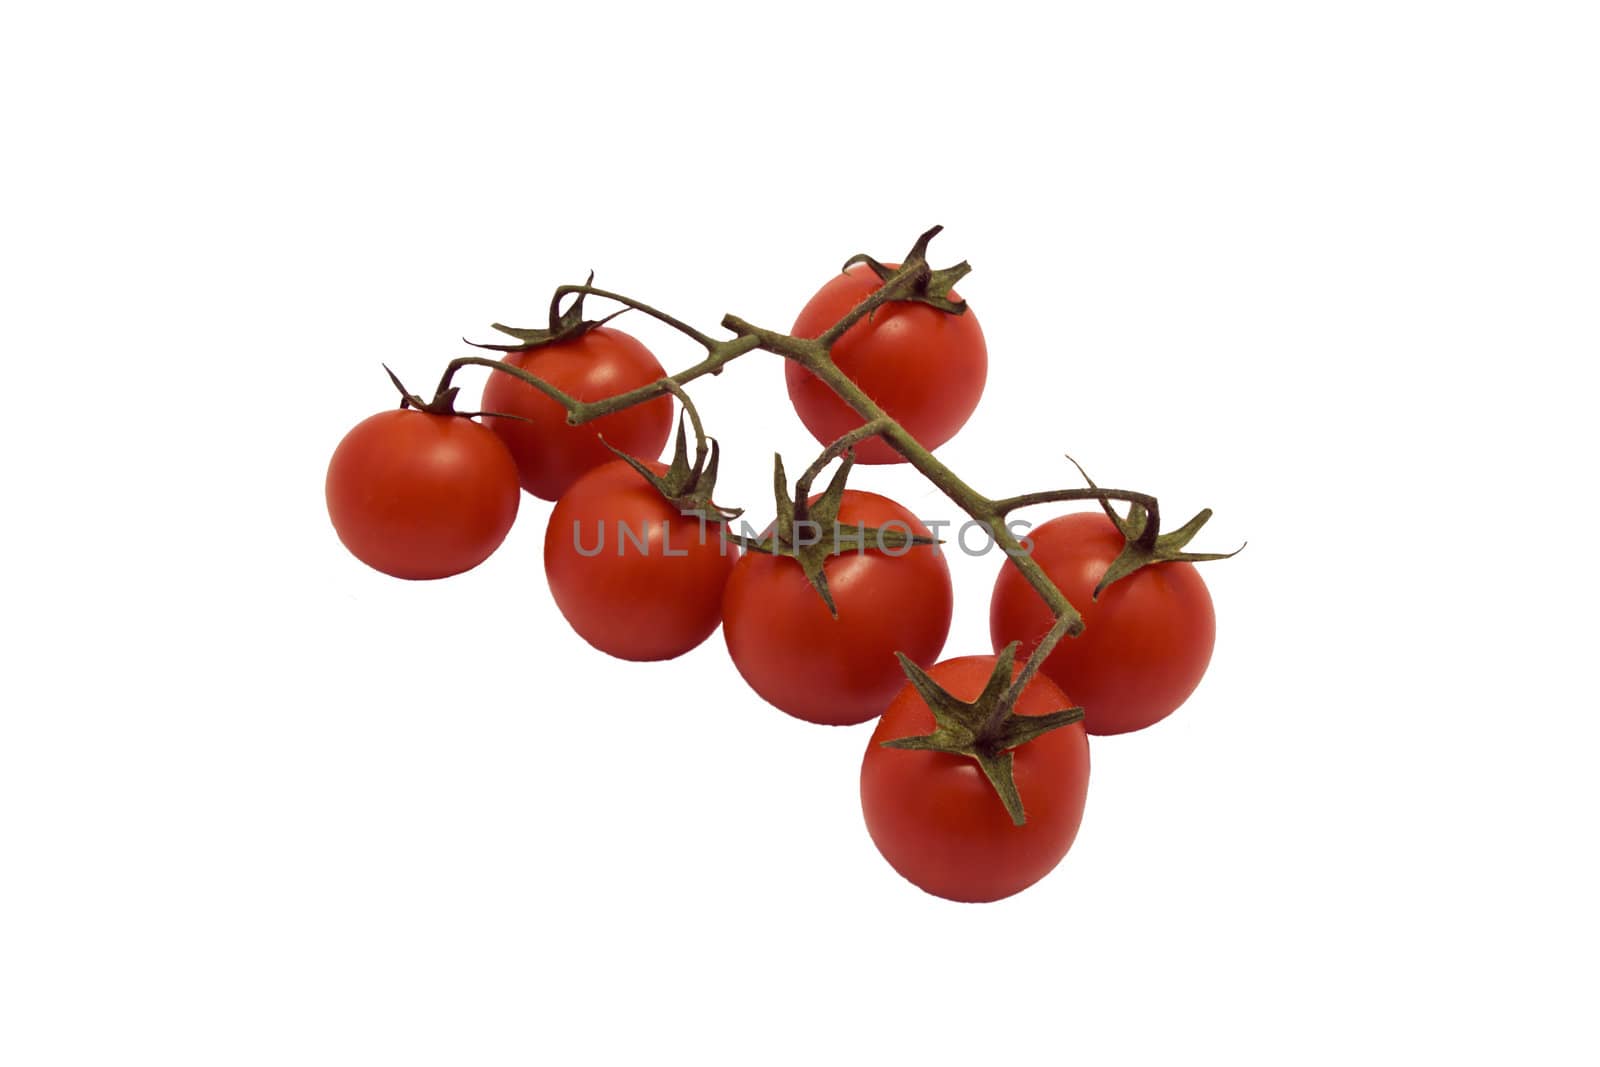 tomatoes on a branch, red and juicy, healthy food